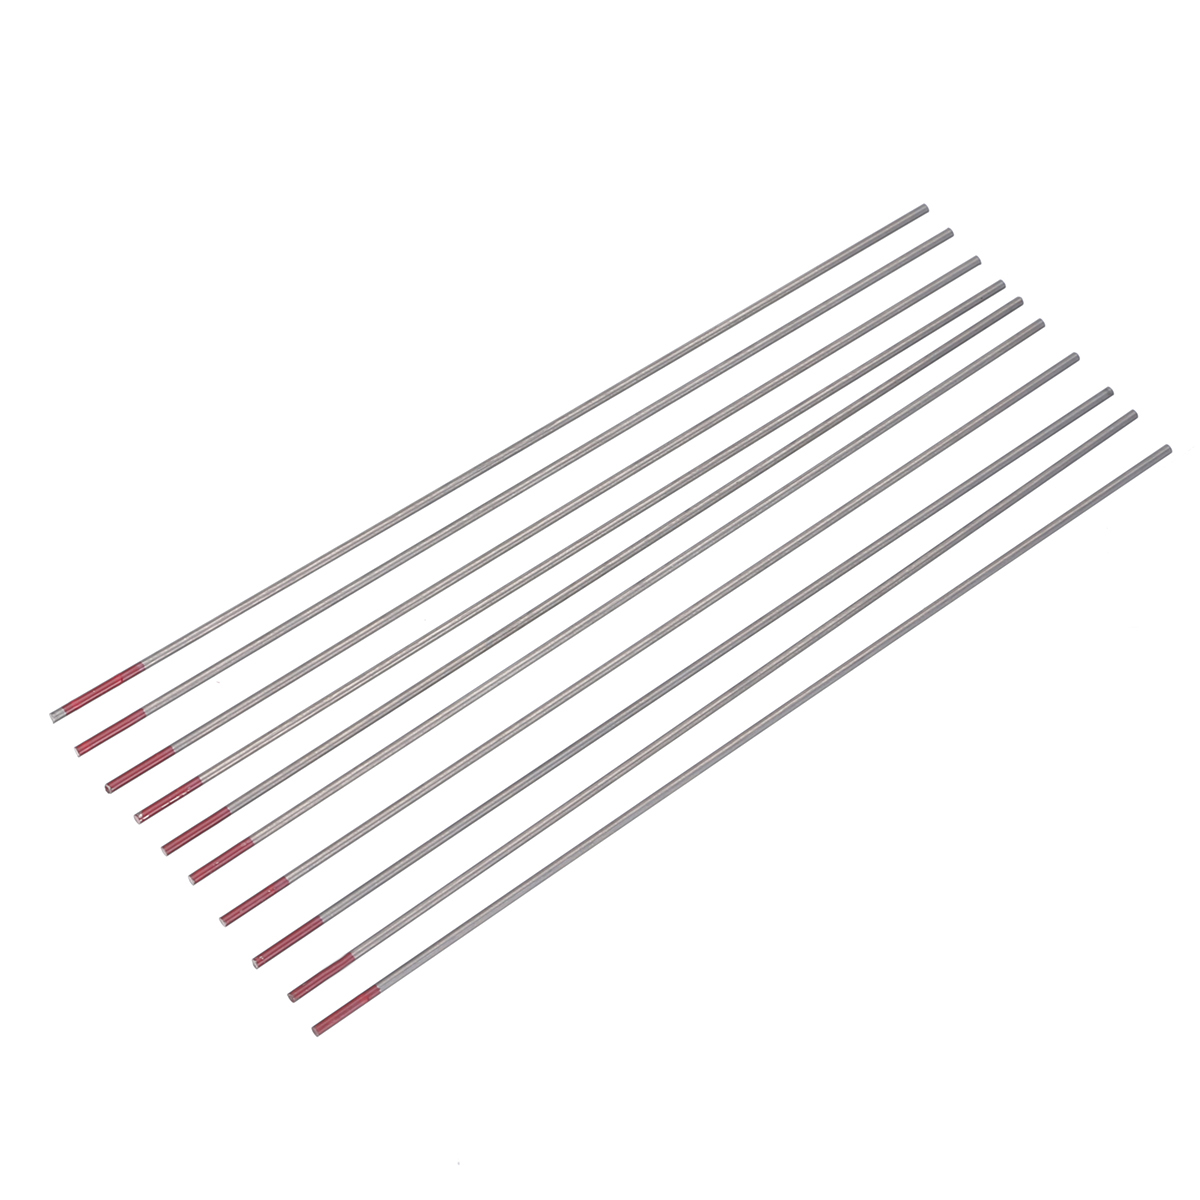 10Pcs TIG Welding Tungsten Electrodes Rod Mayitr 2% Thoriated Tungsten Electrode 1.6x150mm WT20 Red for Welding Carbon Steel